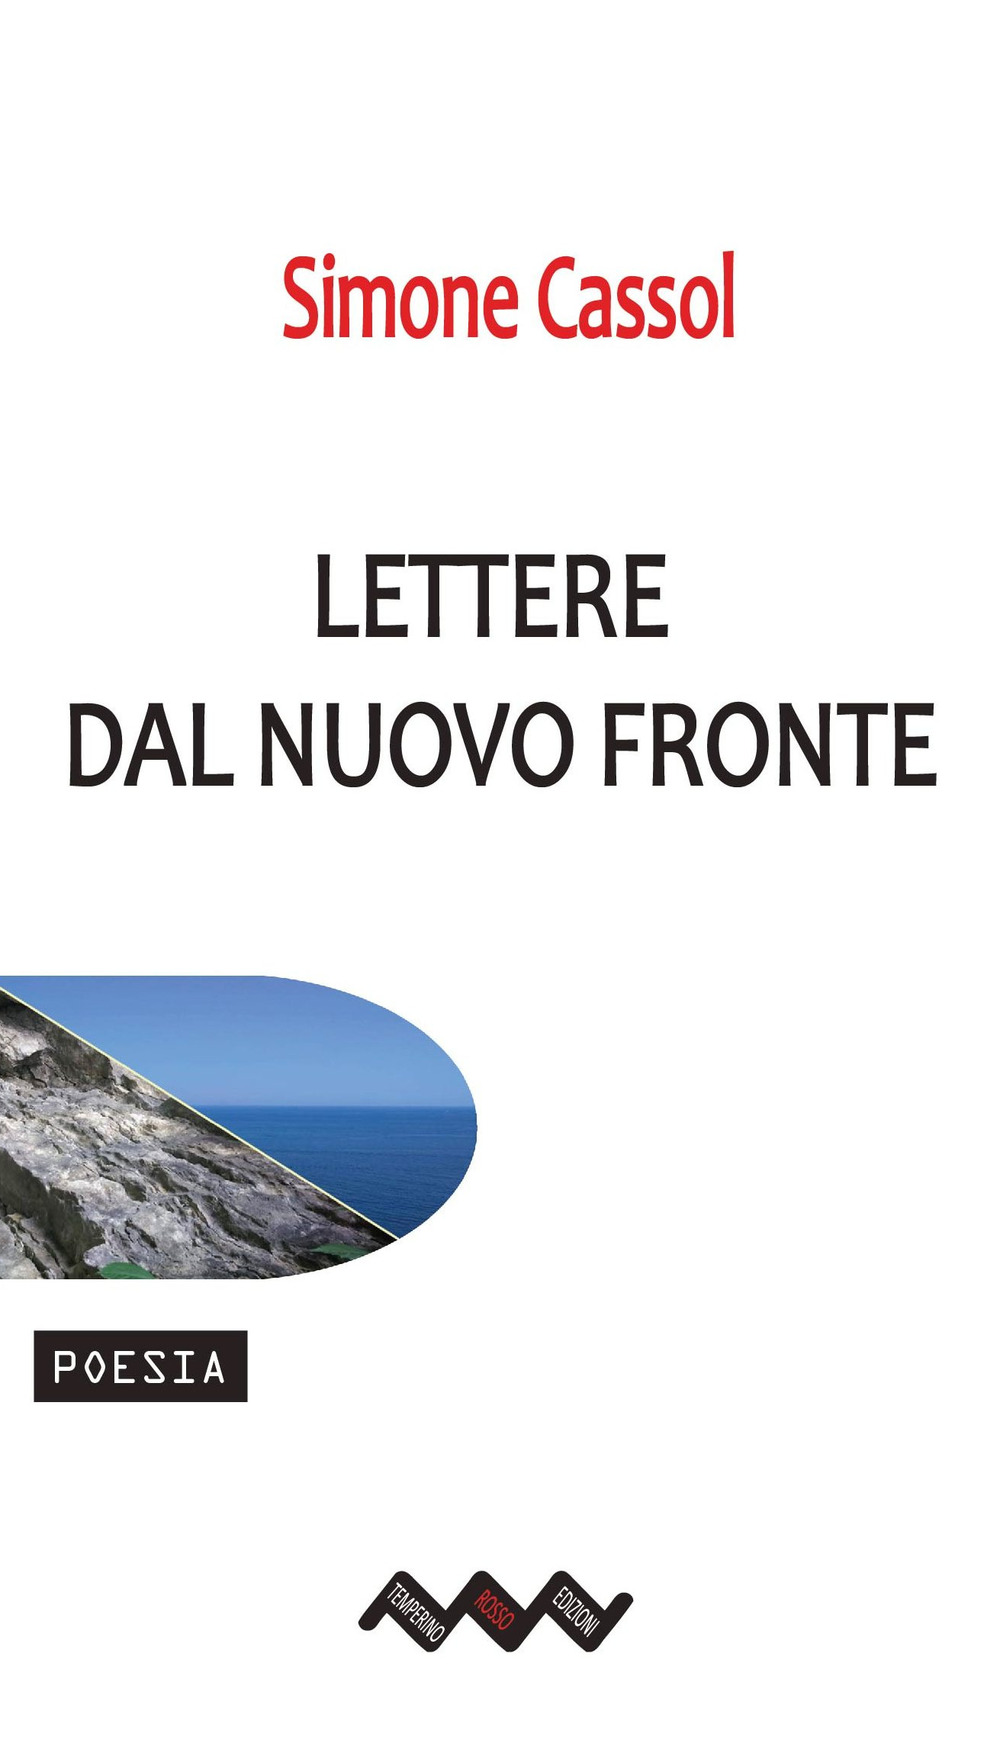 Image of Lettere dal nuovo fronte